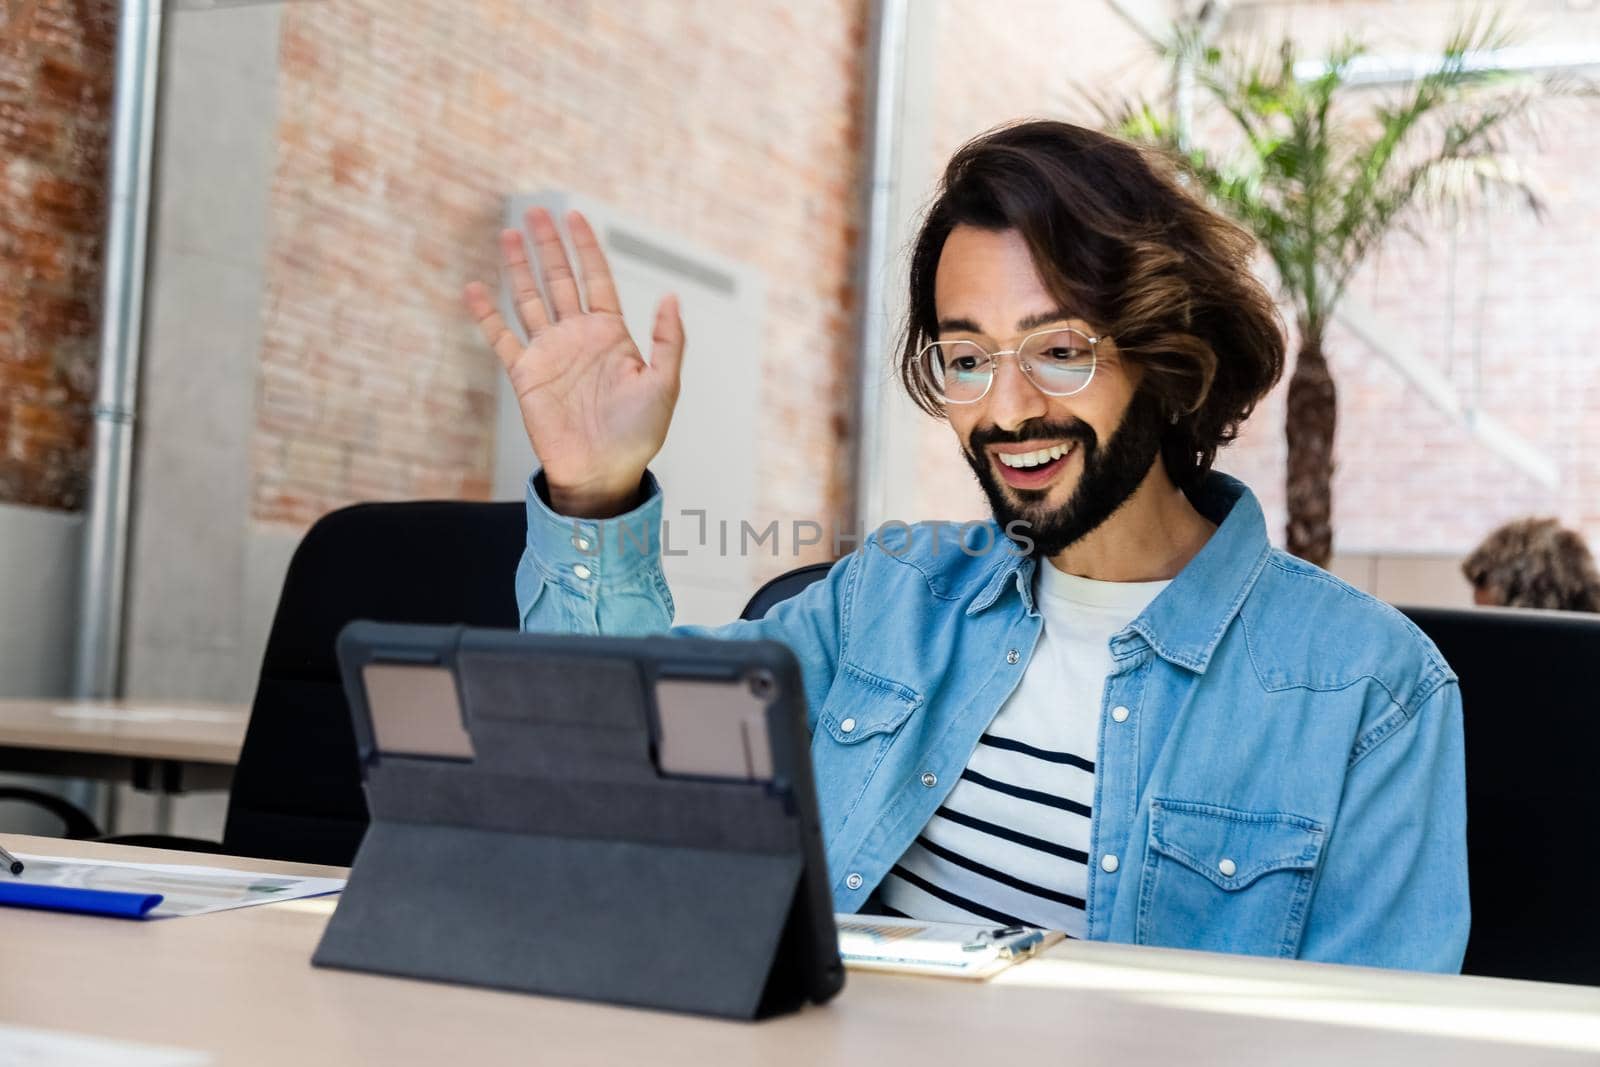 Smiling young caucasian man waving hello on a video call using a digital tablet in the office. Copy space. Technology concept.